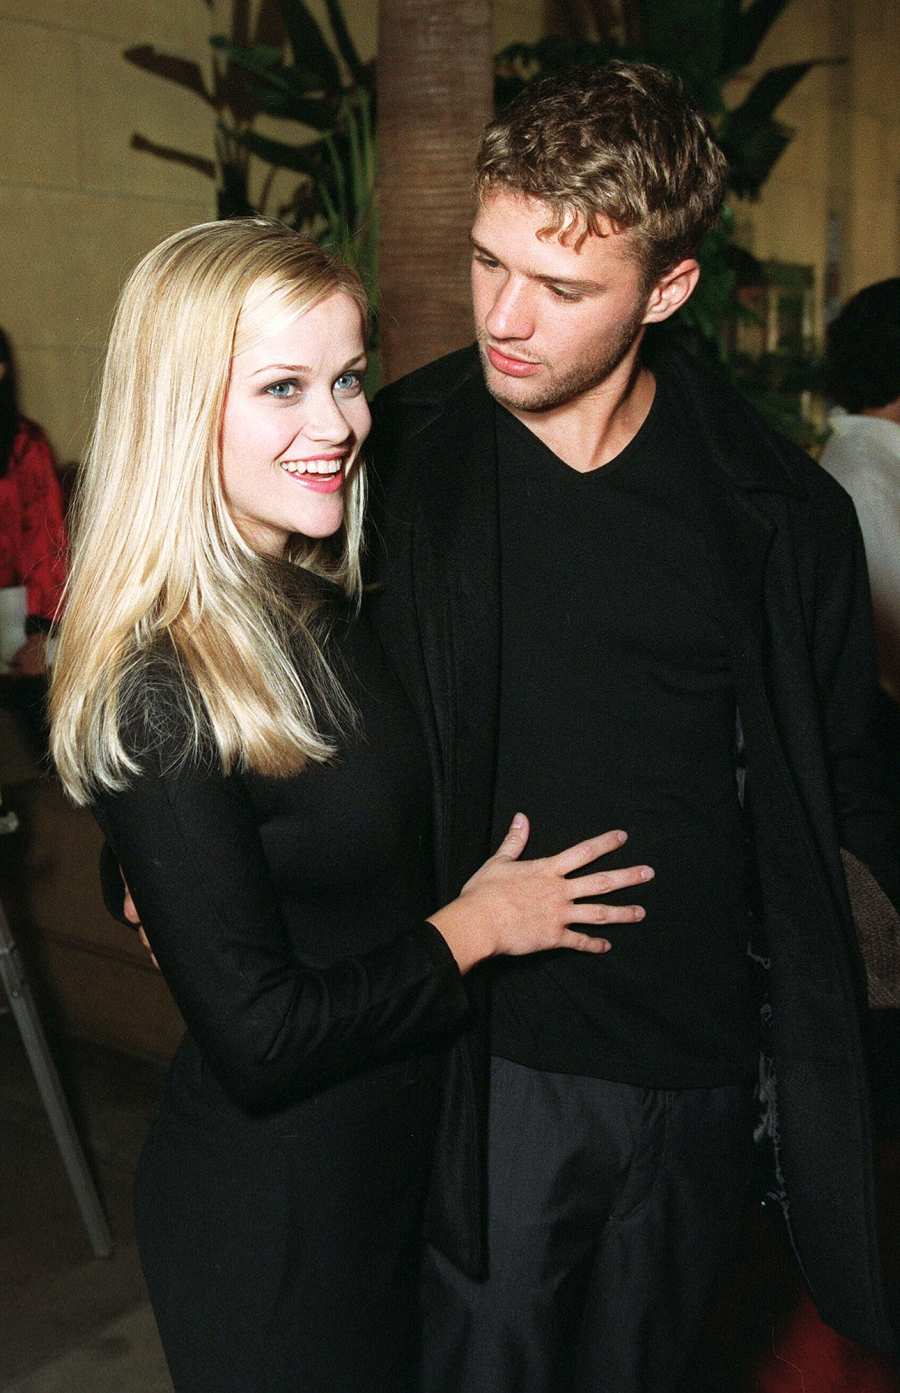 1999 Married Reese Witherspoon and Ryan Phillippe Ups and Downs